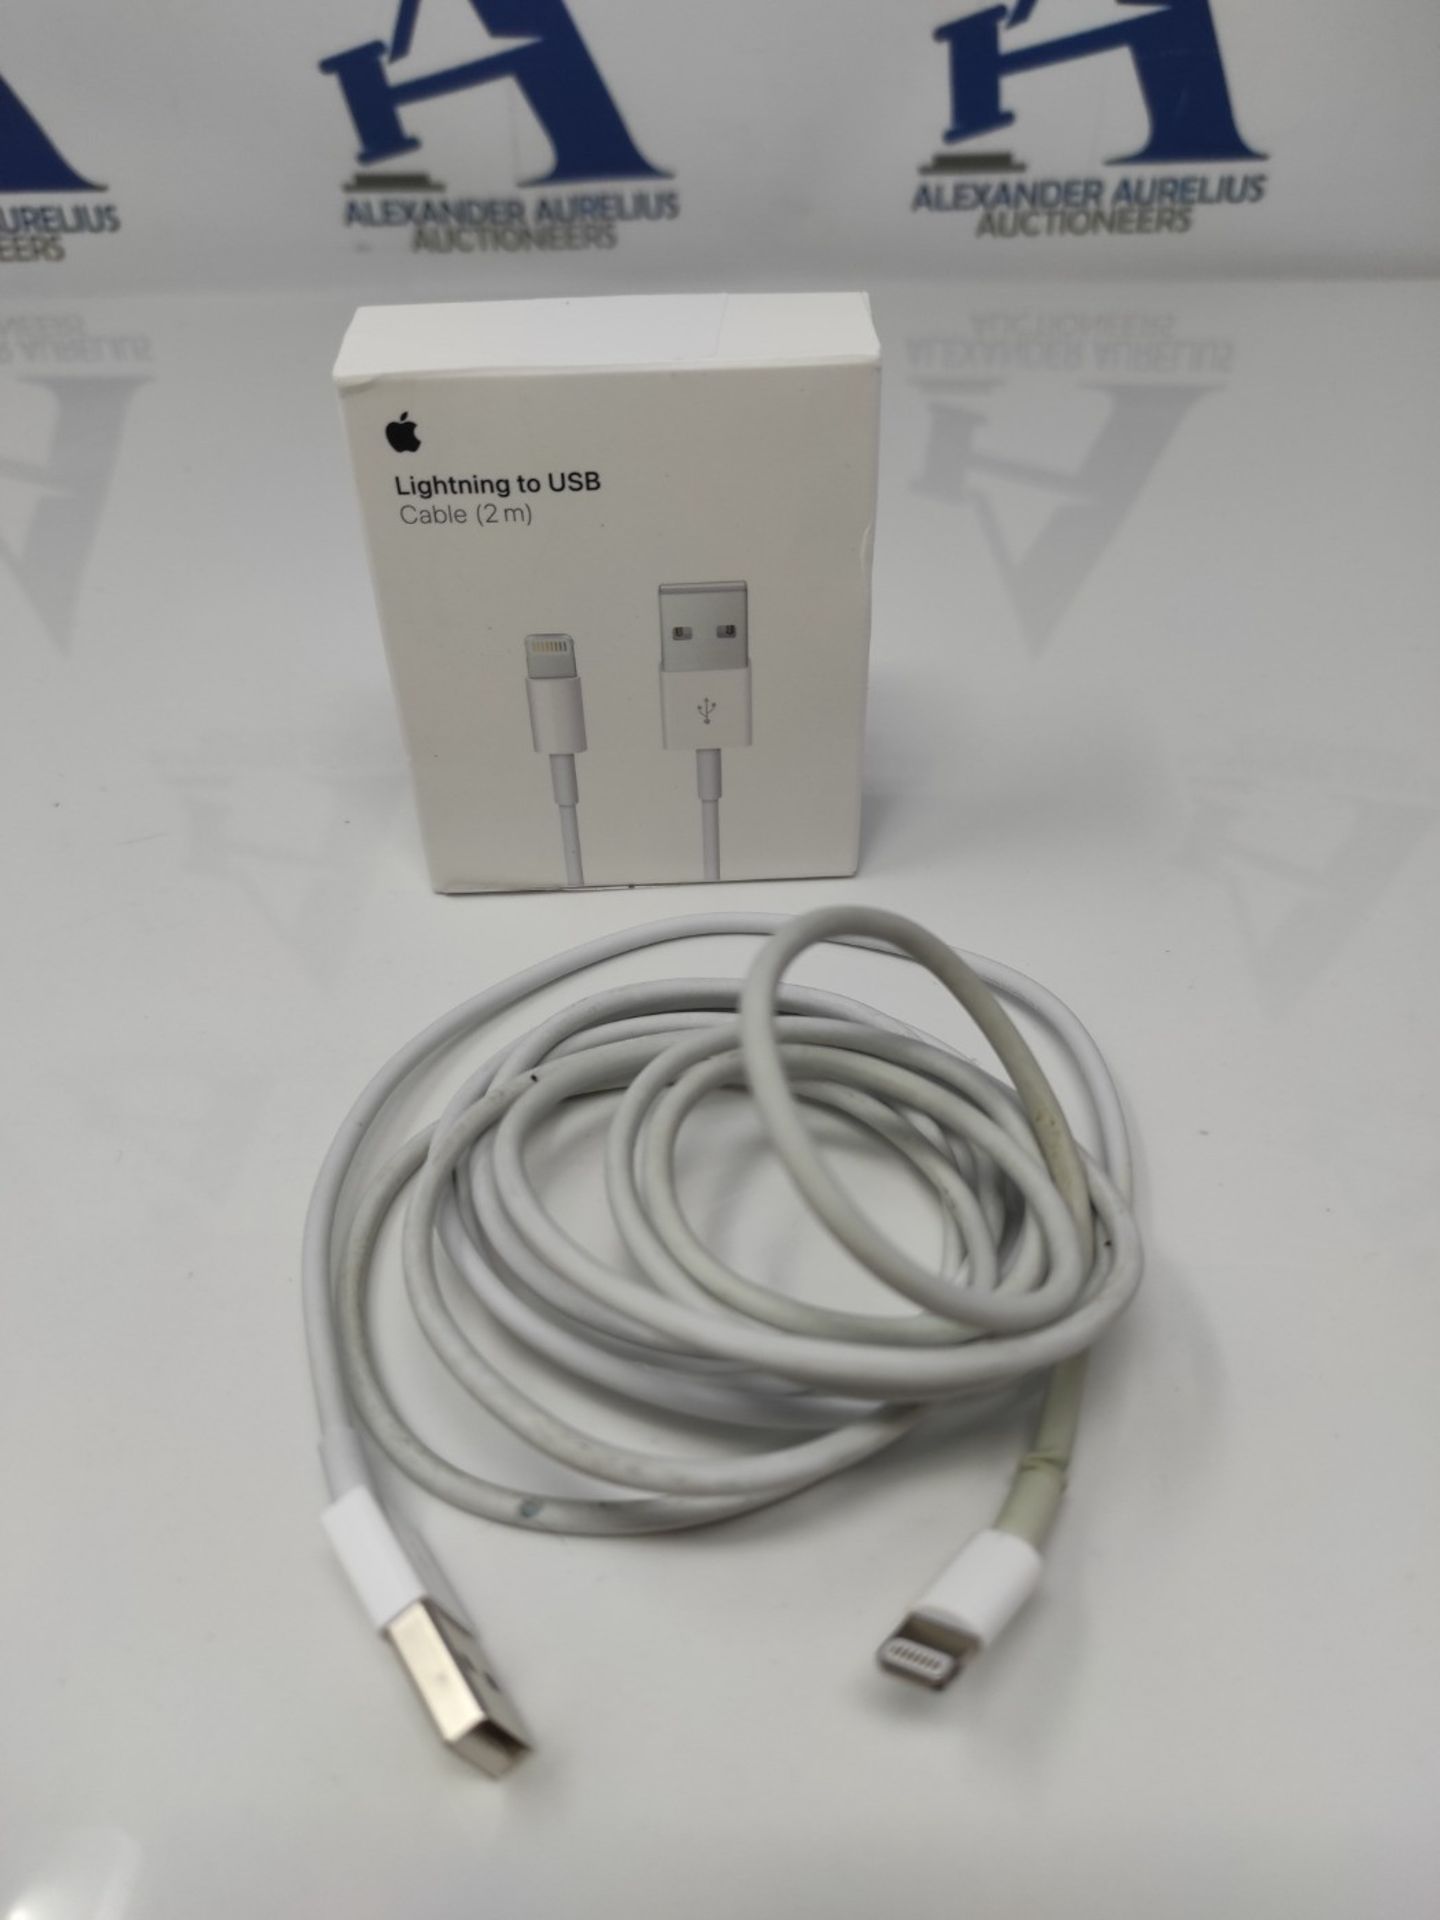 Apple Lightning to USB Cable (2 m) - Image 2 of 2